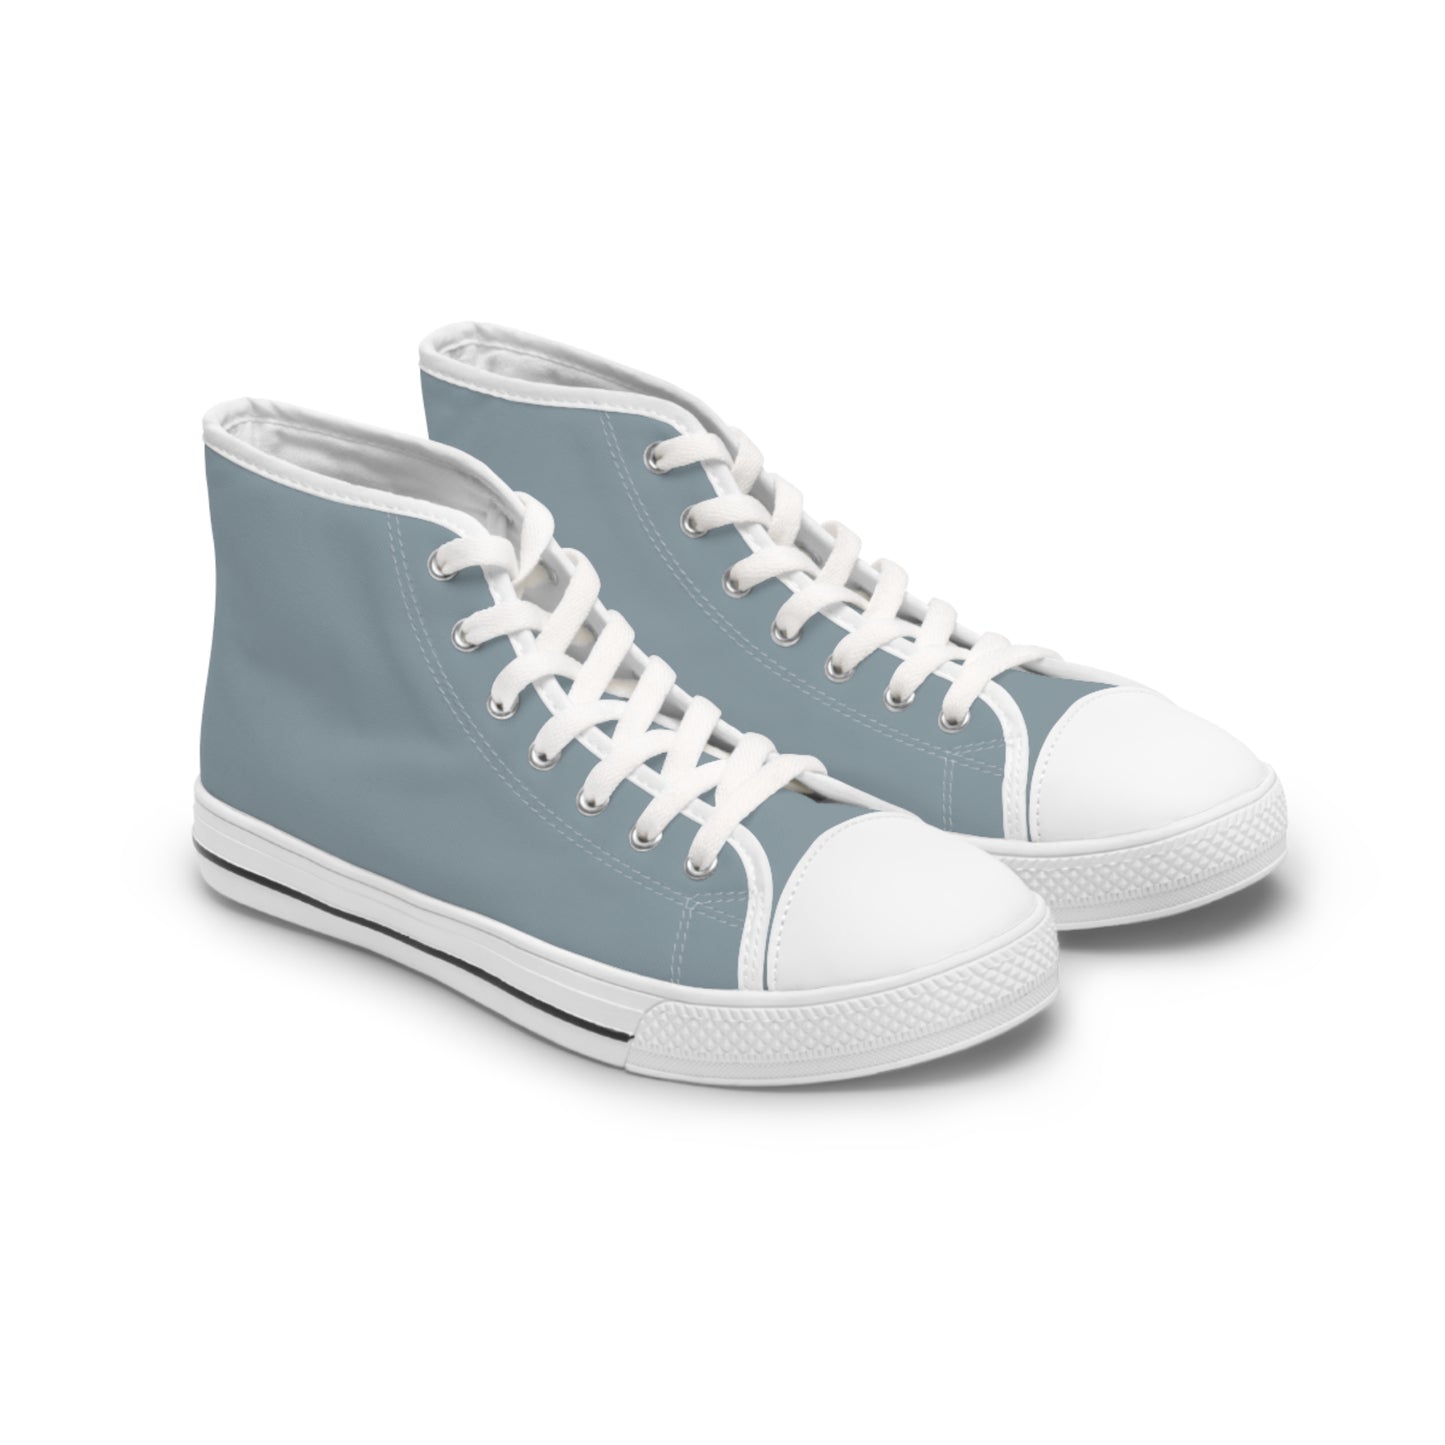 Women's Canvas High Top Solid Color Sneakers - Storm Gray US 12 White sole